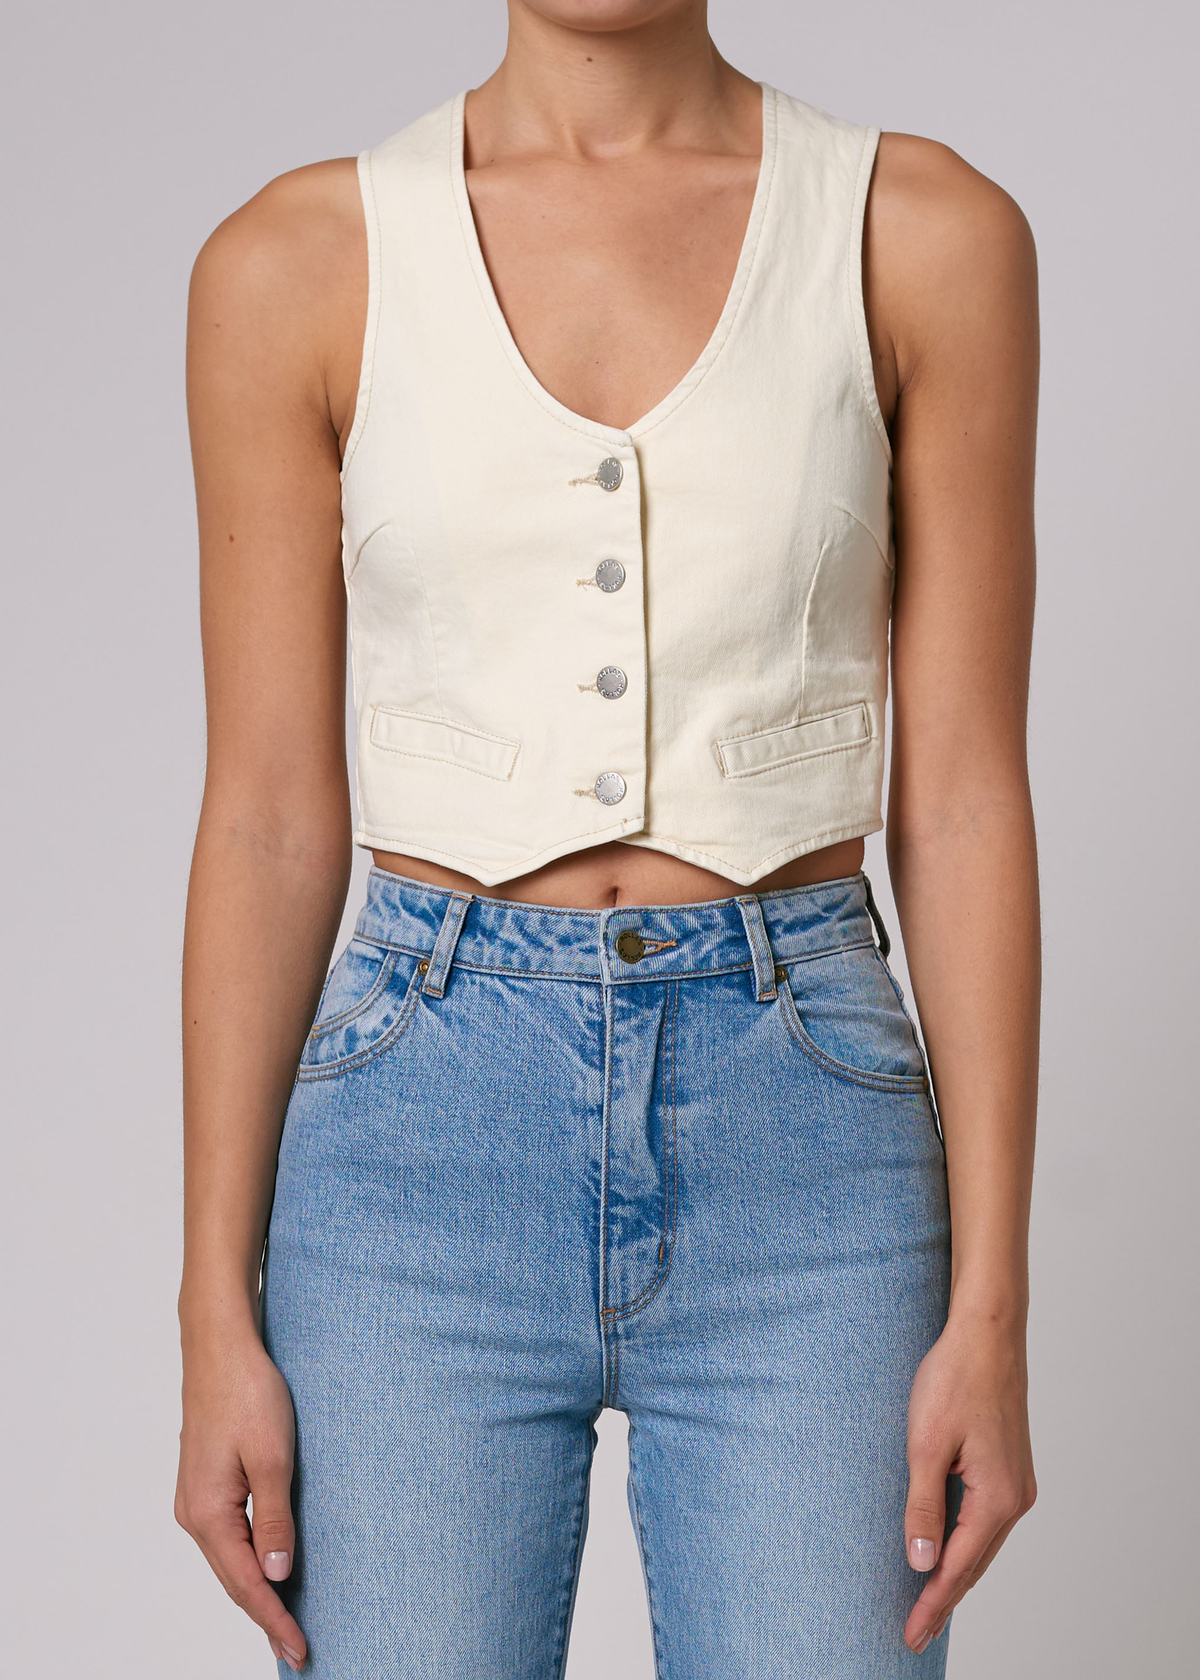 70s 80s inspired Rolla's Jeans Denim Dallas Vest in Buttercream Ivory. V-neckline, button front, and adjustable buckle at back.